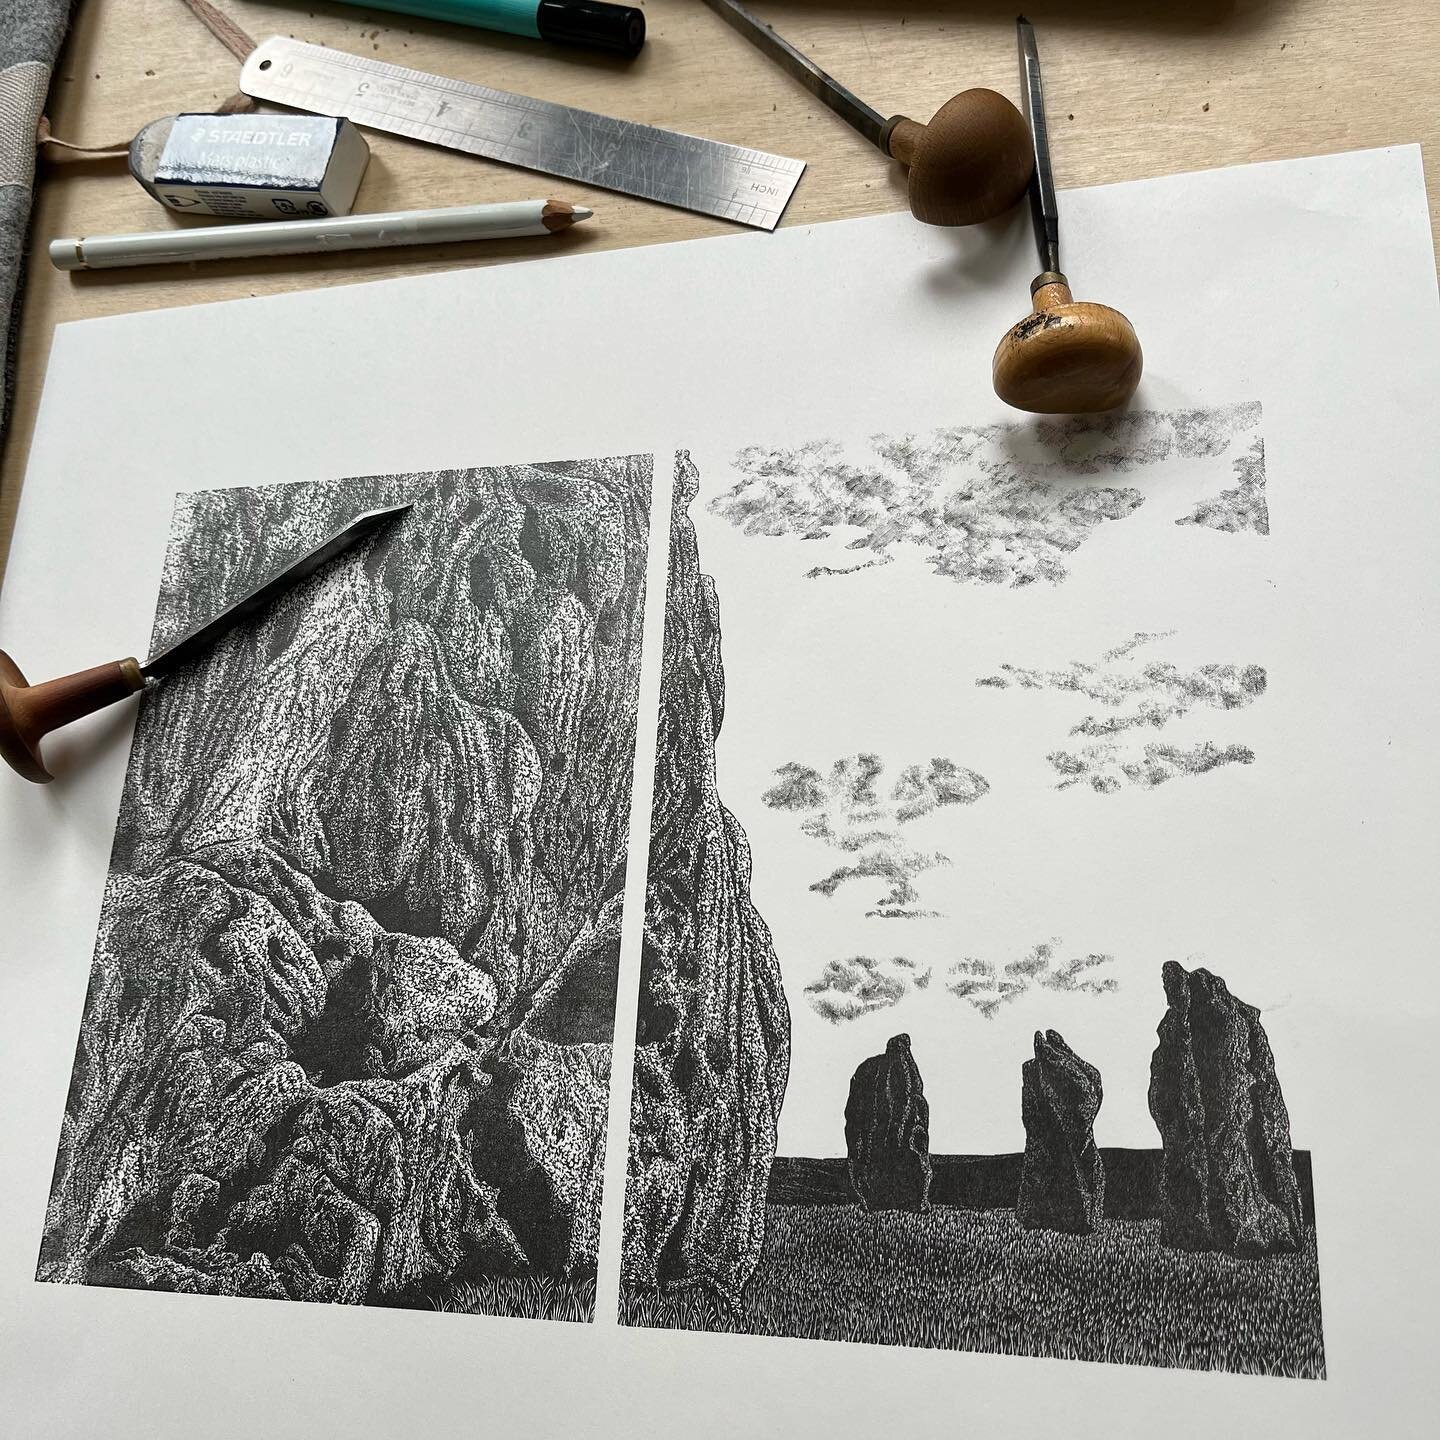 &lsquo;South Circle, Avebury&rsquo; 
It took a while doing all the make ready to get the blocks perfectly flush. Well worth it though as they&rsquo;re printing really nicely. I&rsquo;m aiming for an edition of 50. I&rsquo;ll be showing it for the fir